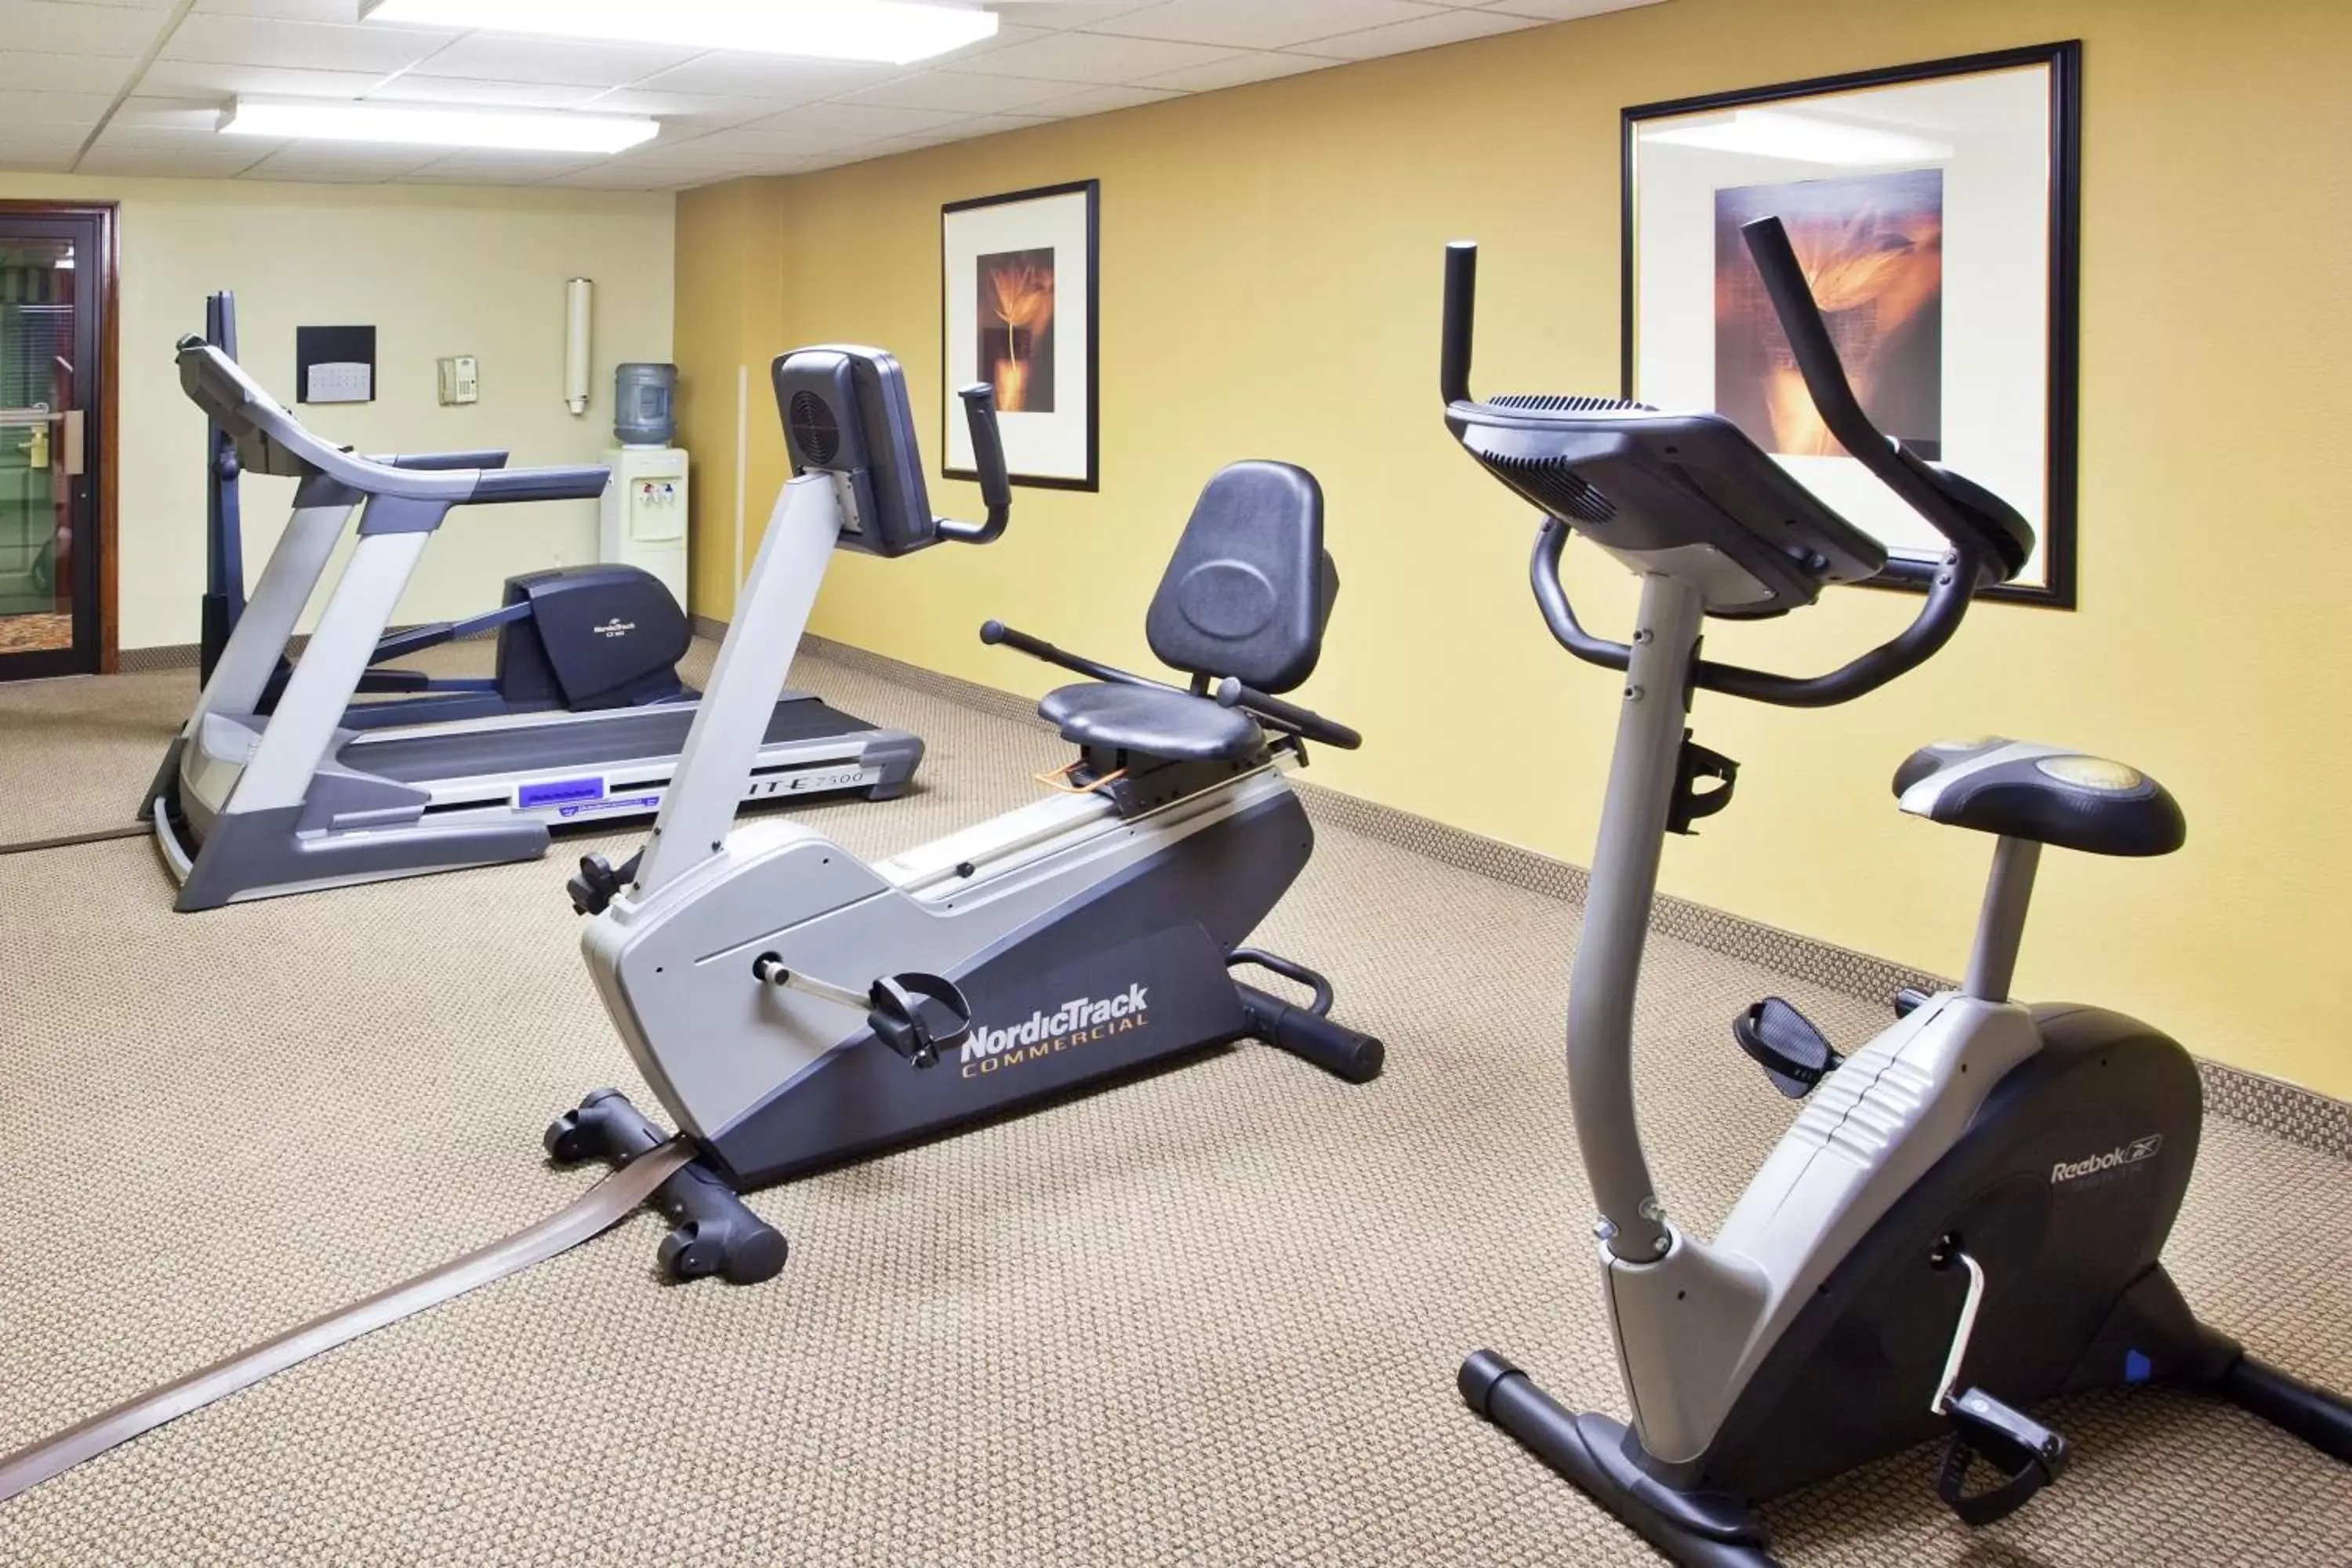 Fitness centre/facilities, Fitness Center/Facilities in Country Inn & Suites by Radisson, Kingsland, GA